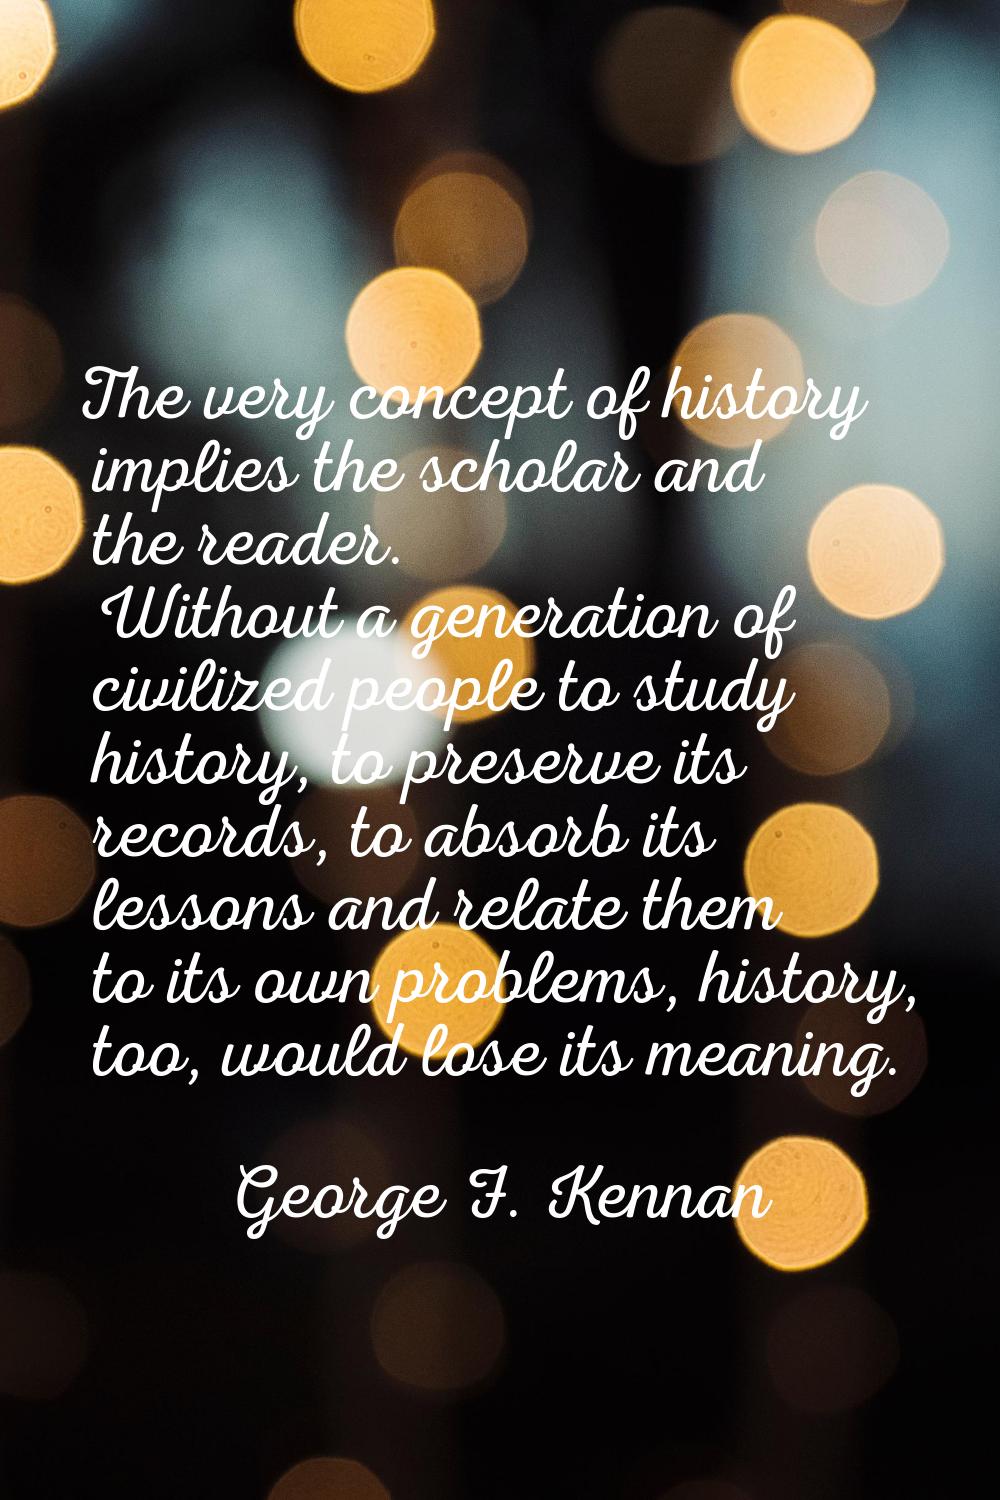 The very concept of history implies the scholar and the reader. Without a generation of civilized p